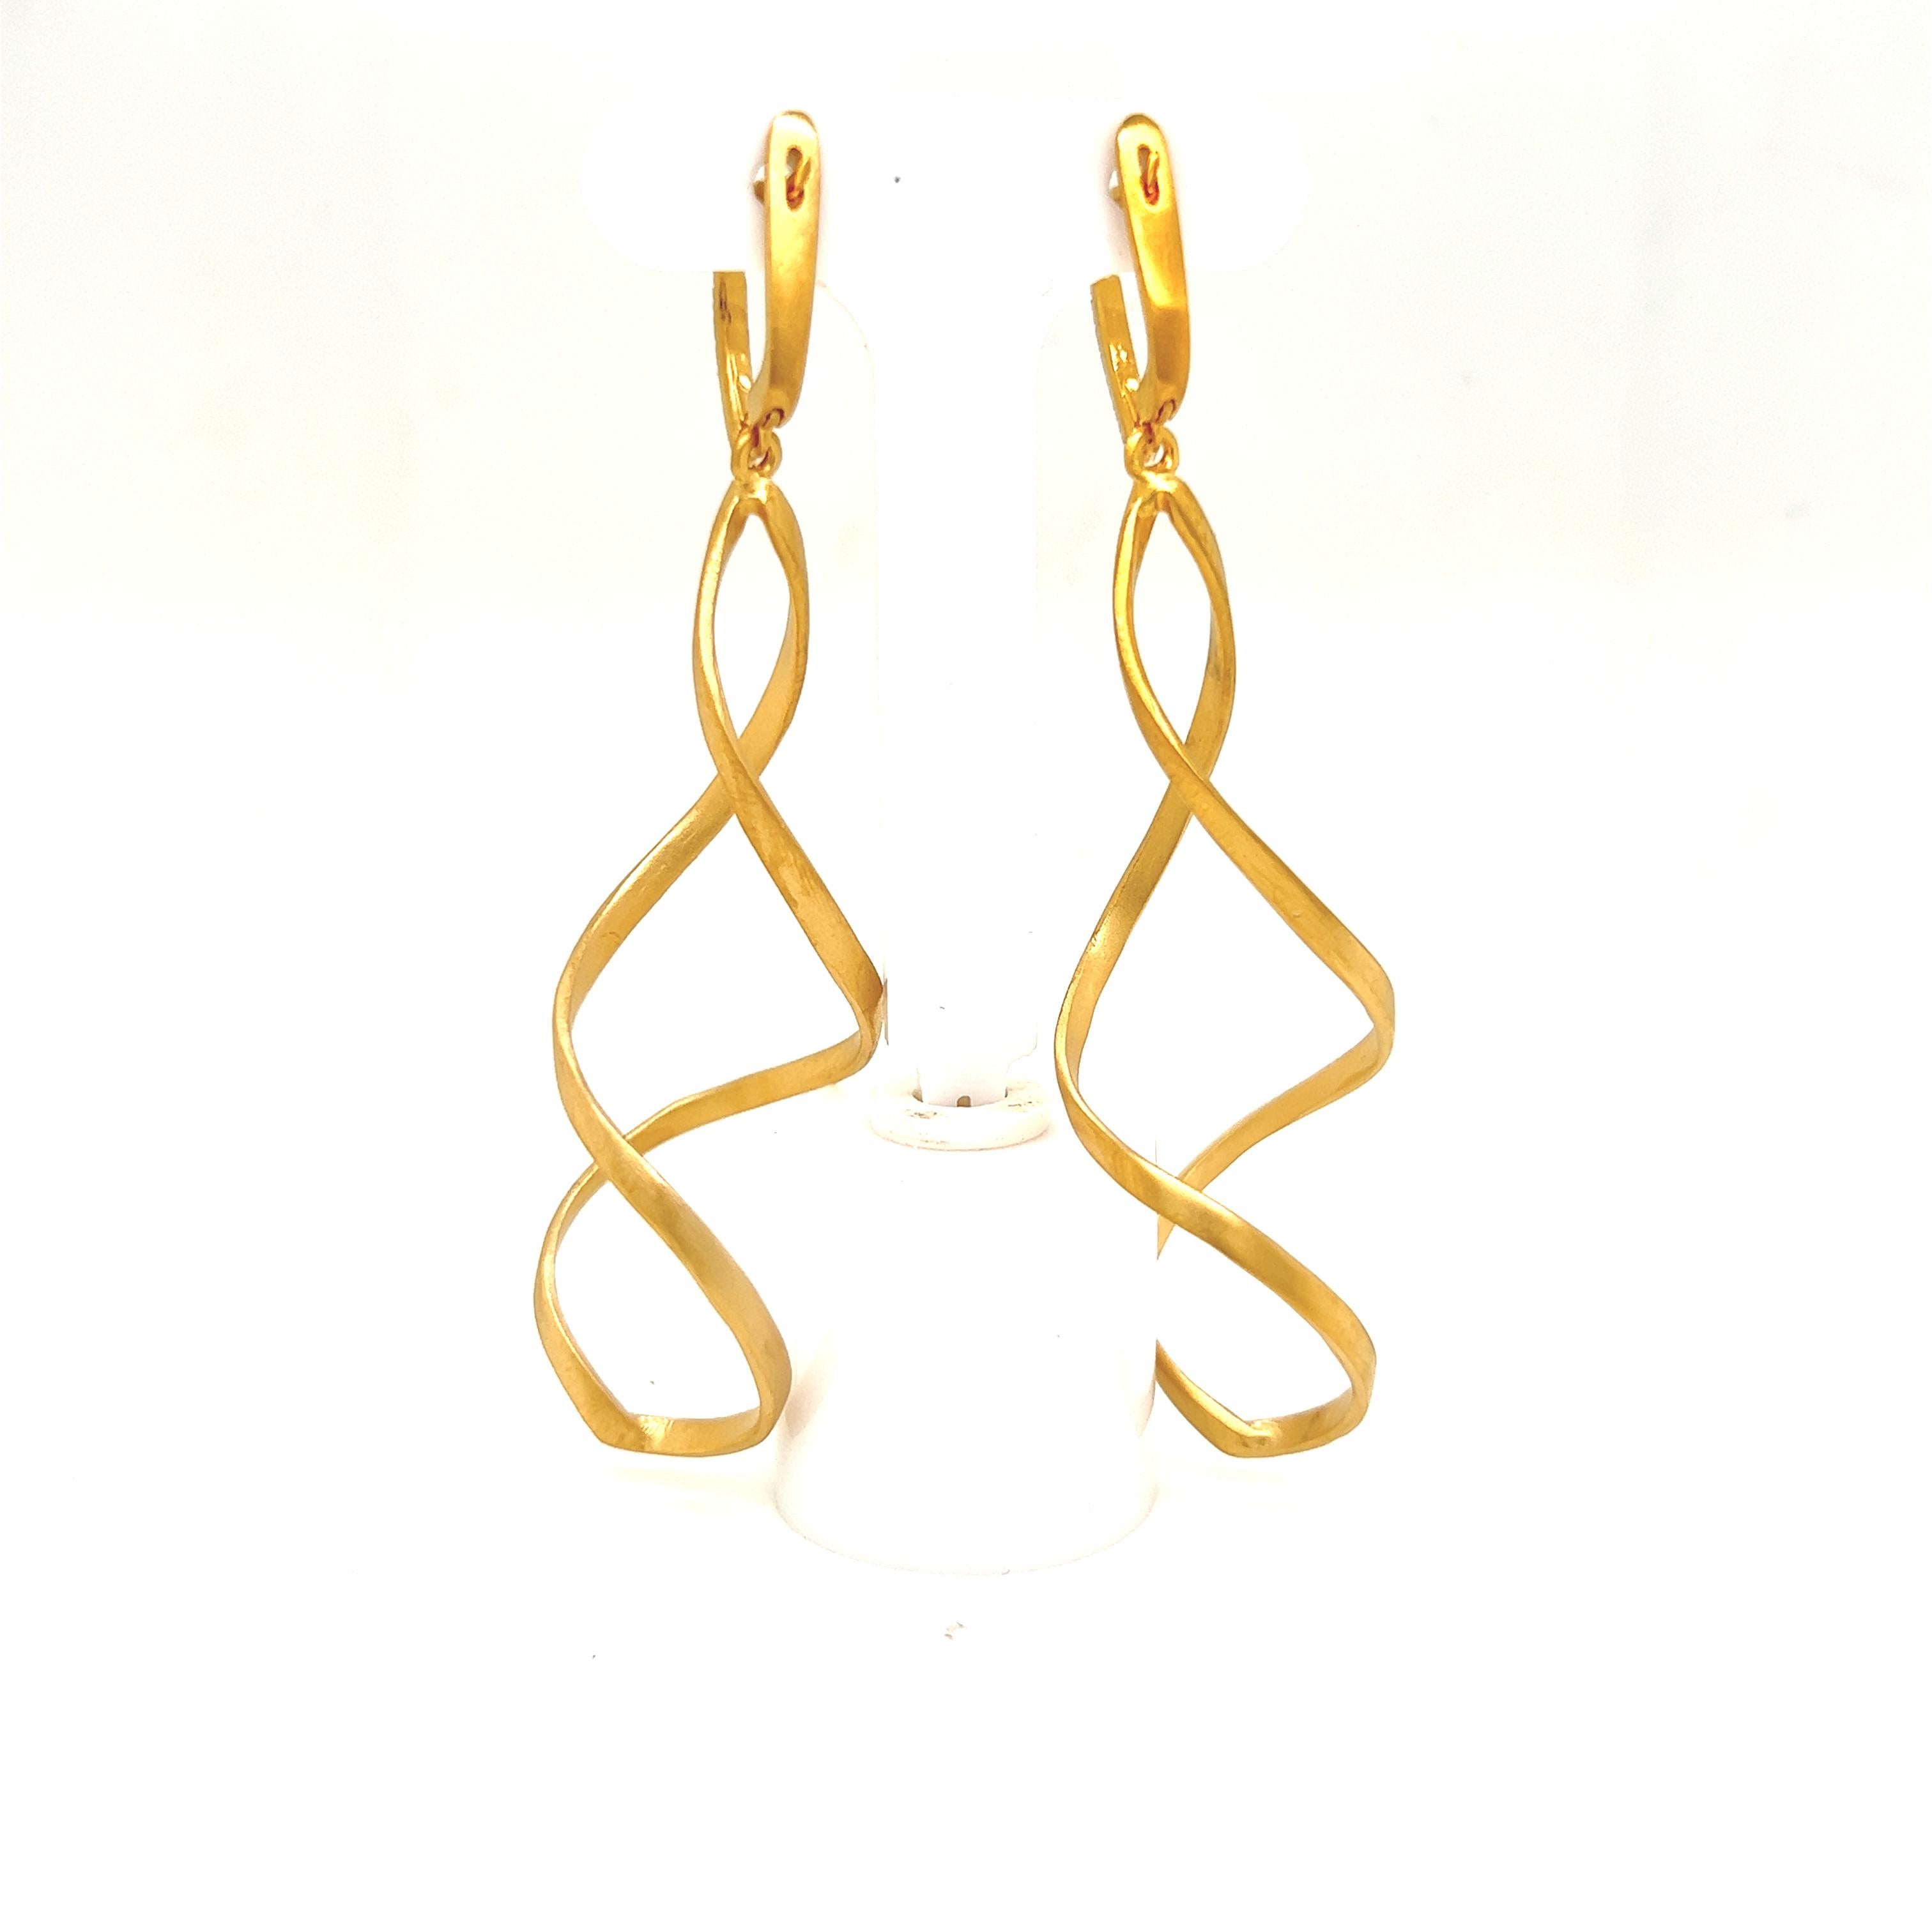 14 Karat Yellow Gold Hand-Crafted Satin-Finished Dangling Spiral Earrings, Accented with 0.09 Carats of Pave Set Diamond Lever Back Closures.
